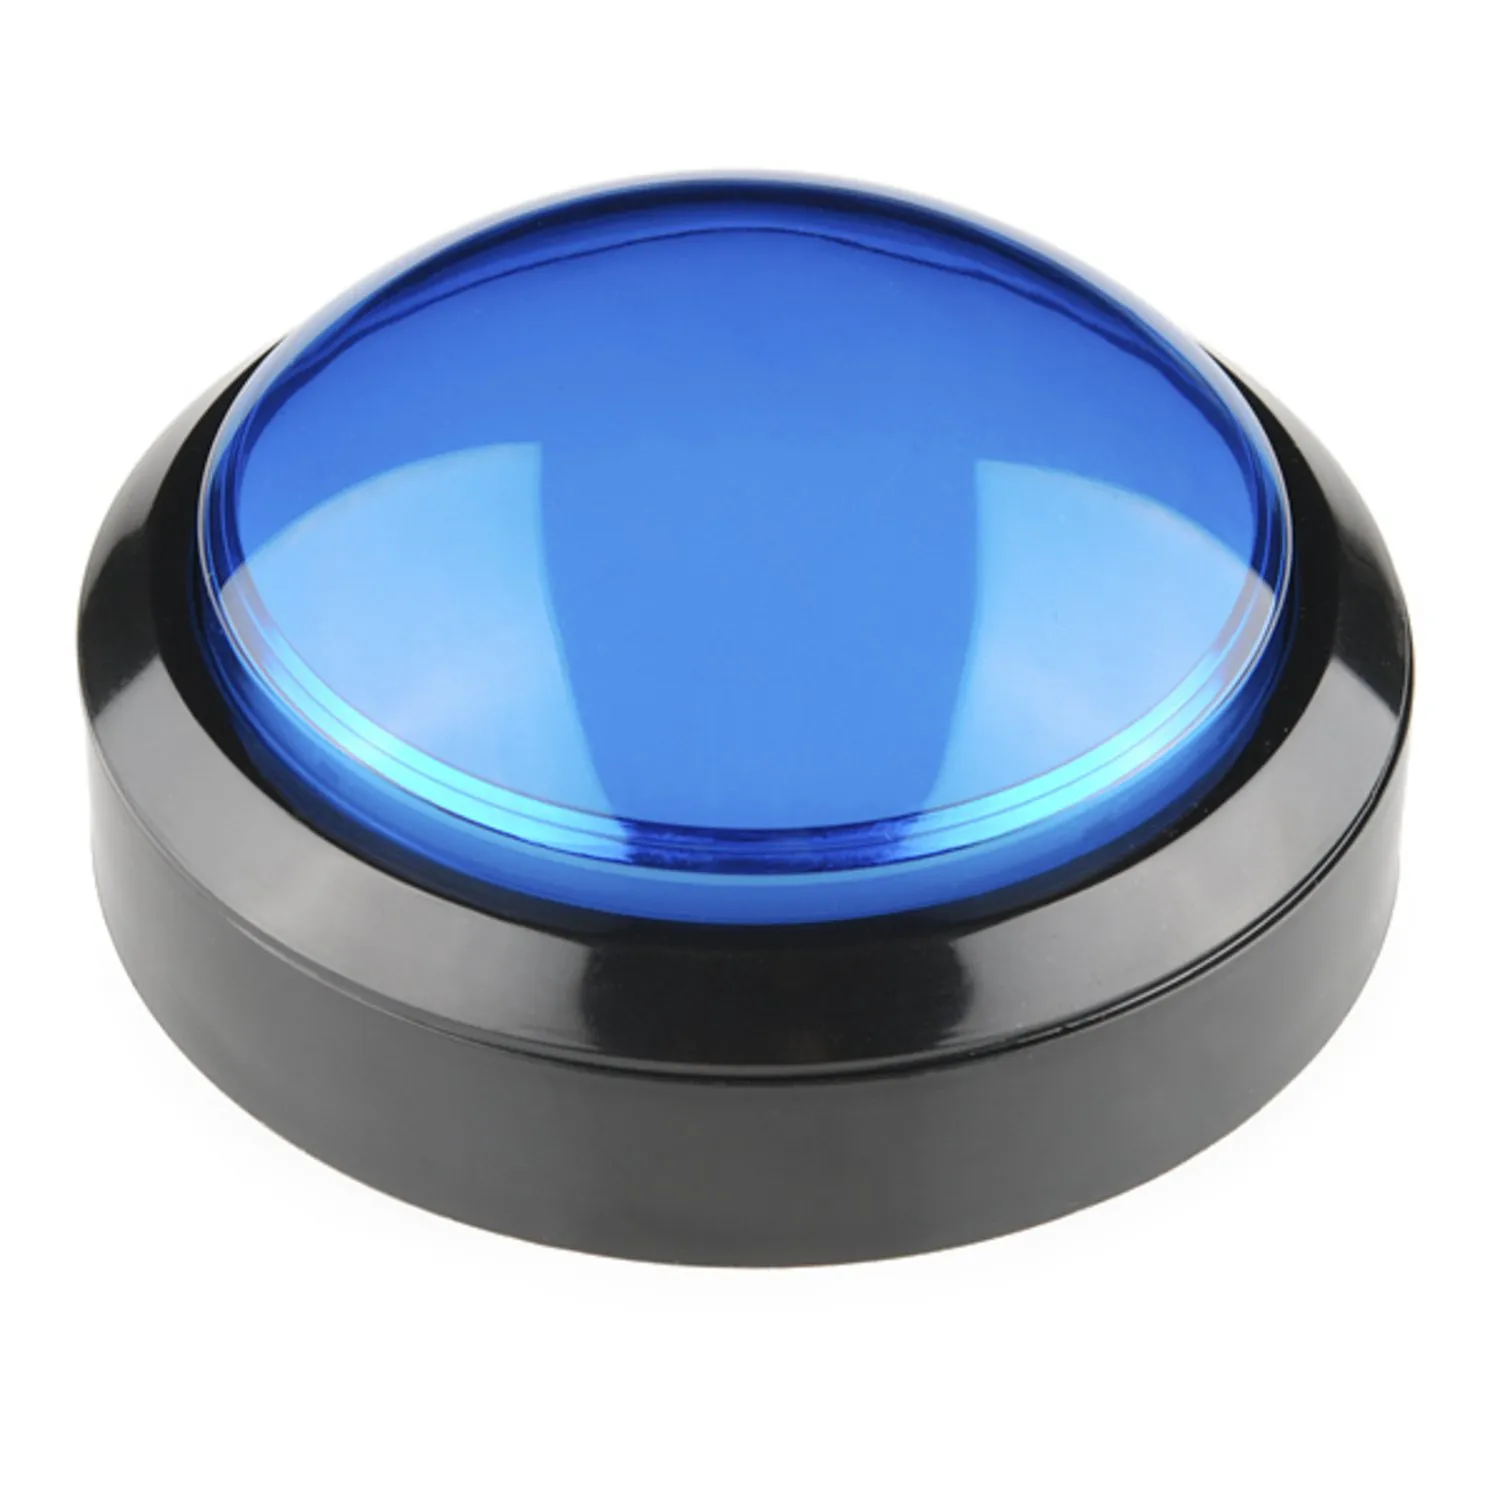 Photo of Big Dome Pushbutton - Blue